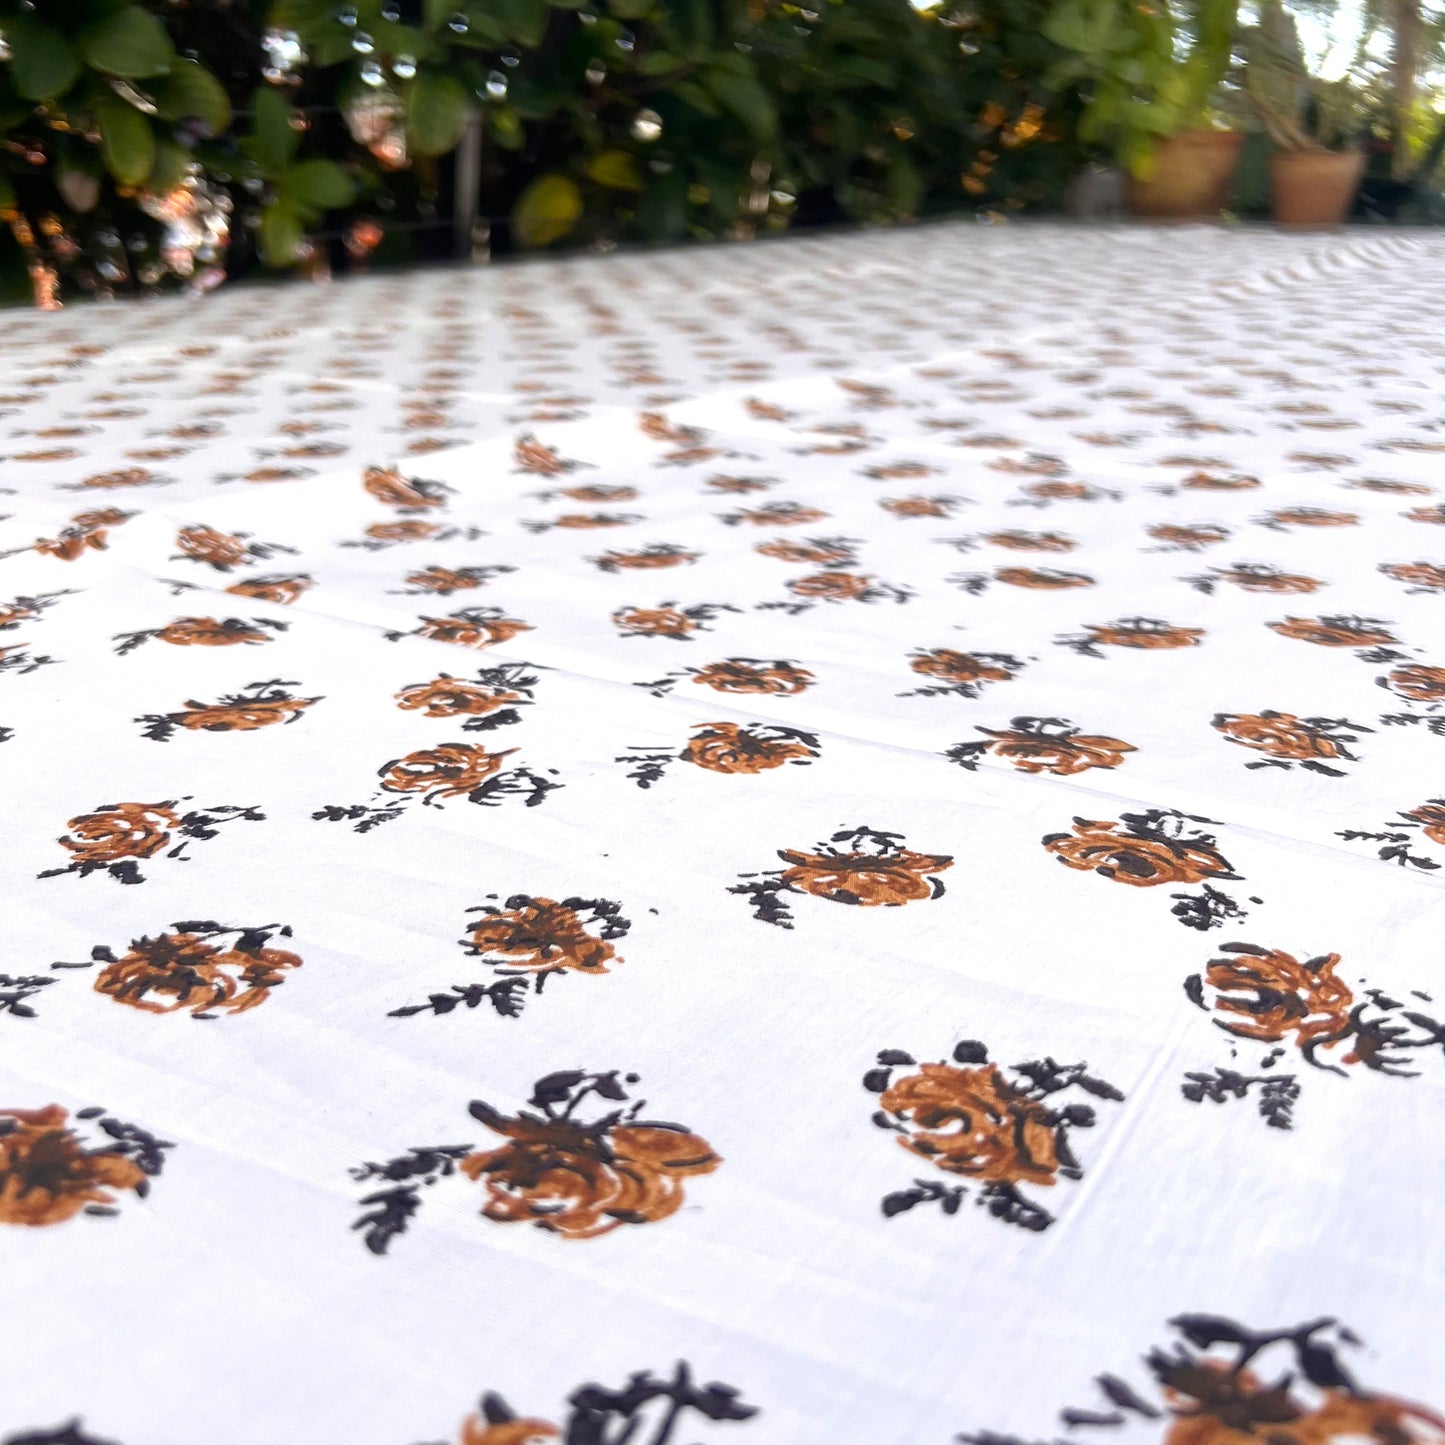 rose print cotton tablecloth natural and coffee